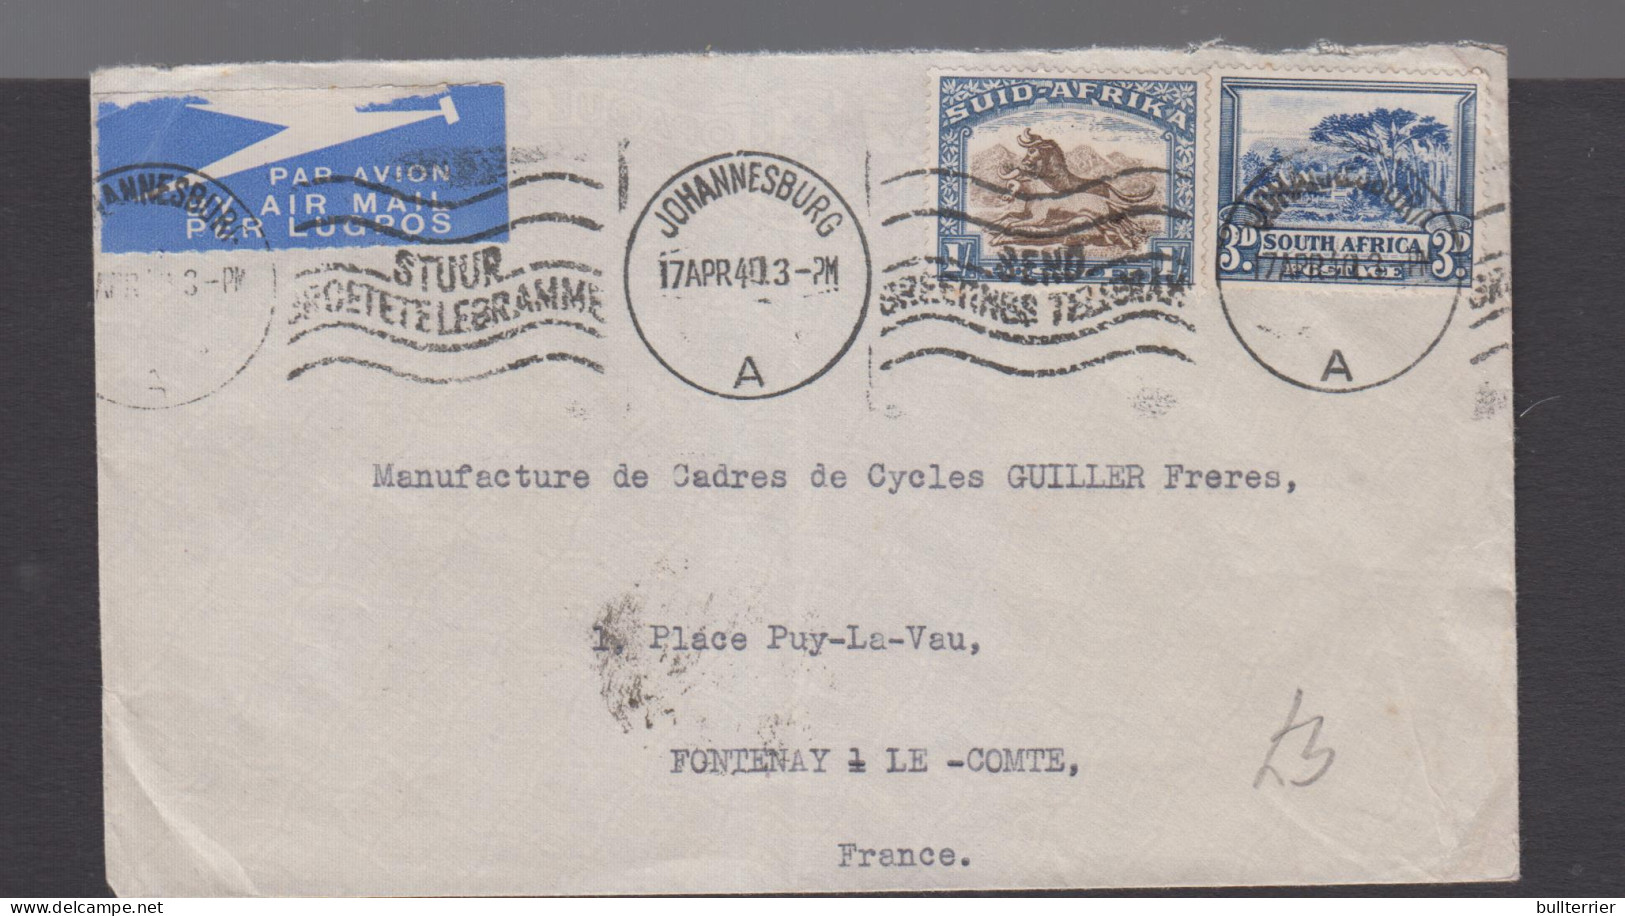 AIRMAILS - SOUTH AFRICA - 1940 - AIRMAIL COVER JO BURG TO FONTENAY LE COMTE  - Aéreo